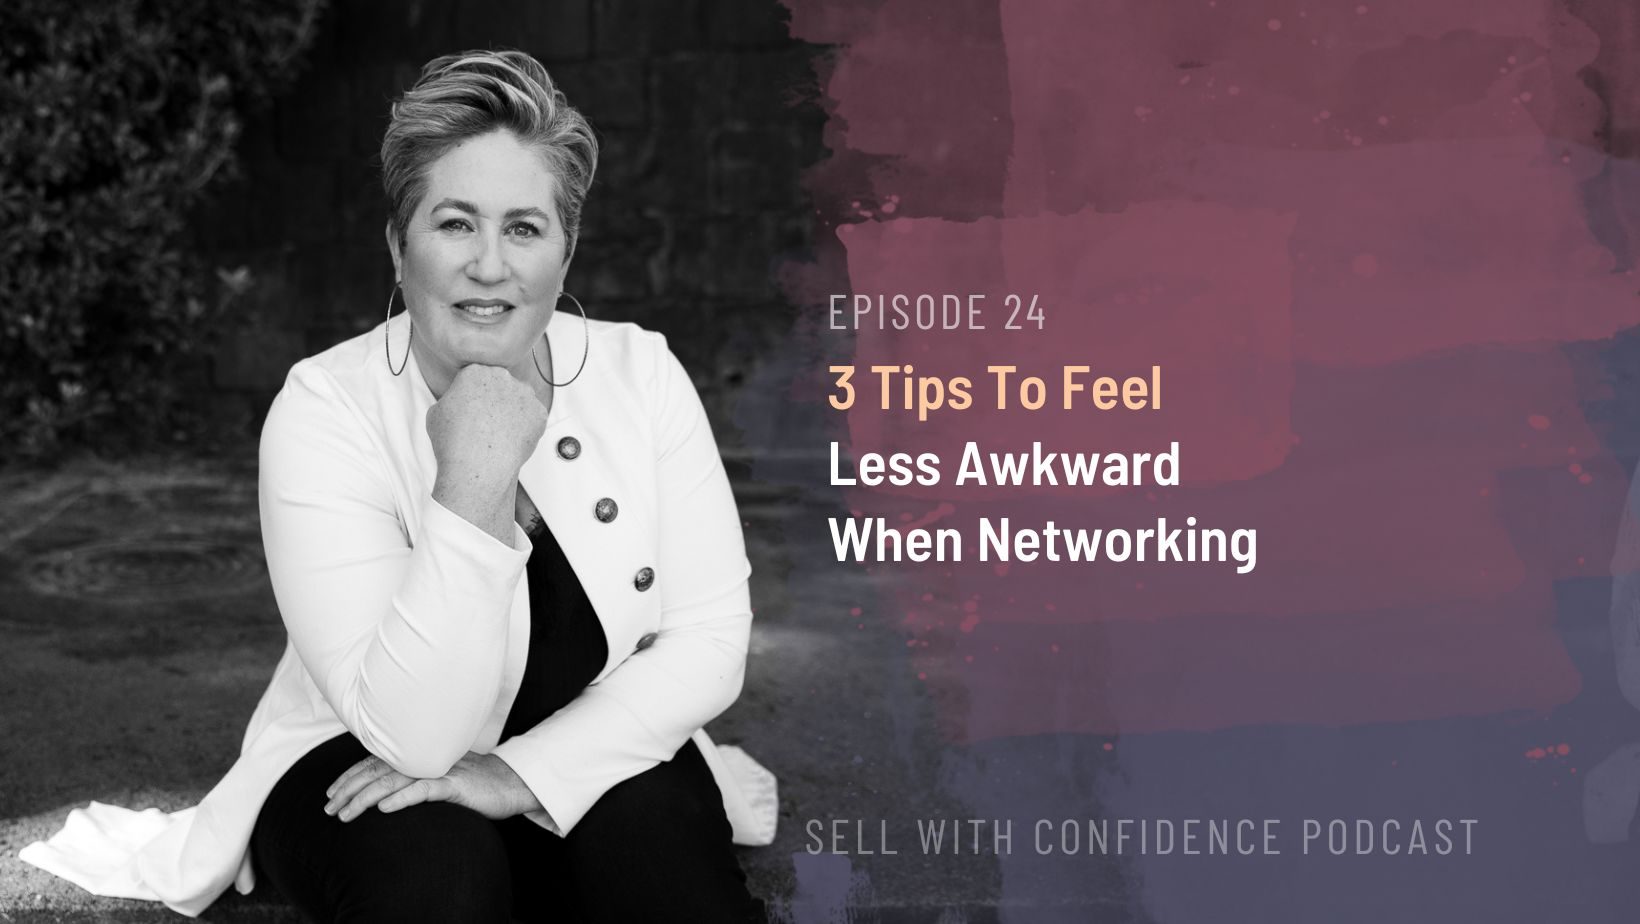 3 Tips To Feel Less Awkward when Networking - Natalie Tolhopf Podcast